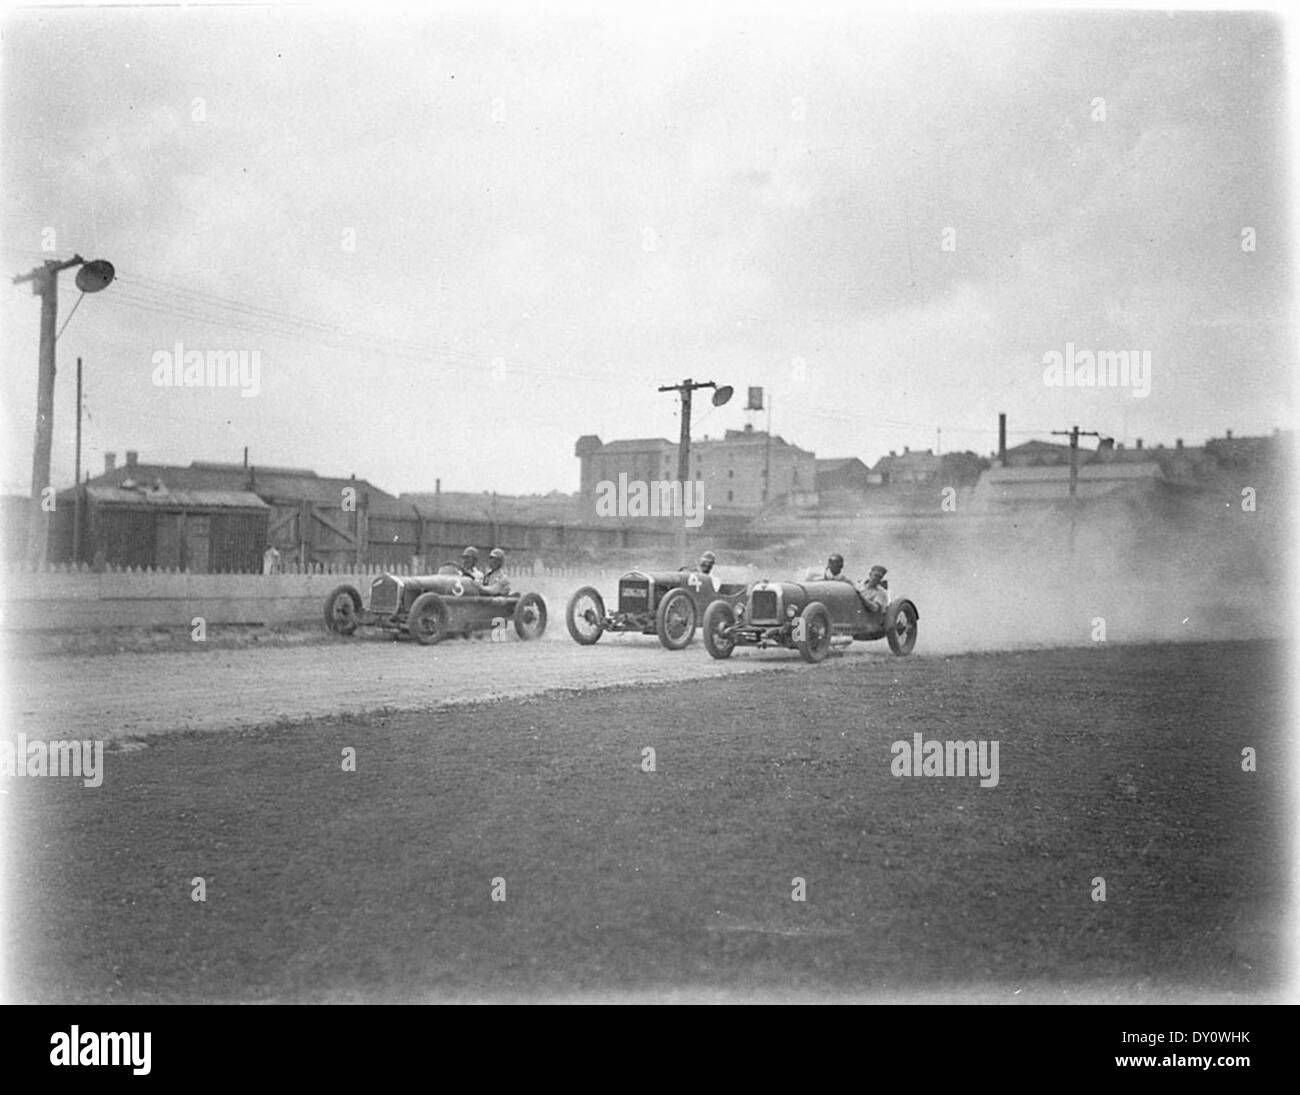 From right, supercharged 1924 Alvis of Fred Braitling, no.4 (registration no.226-276) is the Fronty Ford Special of Charlie Spurgeon and no.3 is the Rajo Ford Special of Don Shorten, taken for Cinesound, Wentworth Autodrome, Nov 1933, Ted Hood Stock Photo